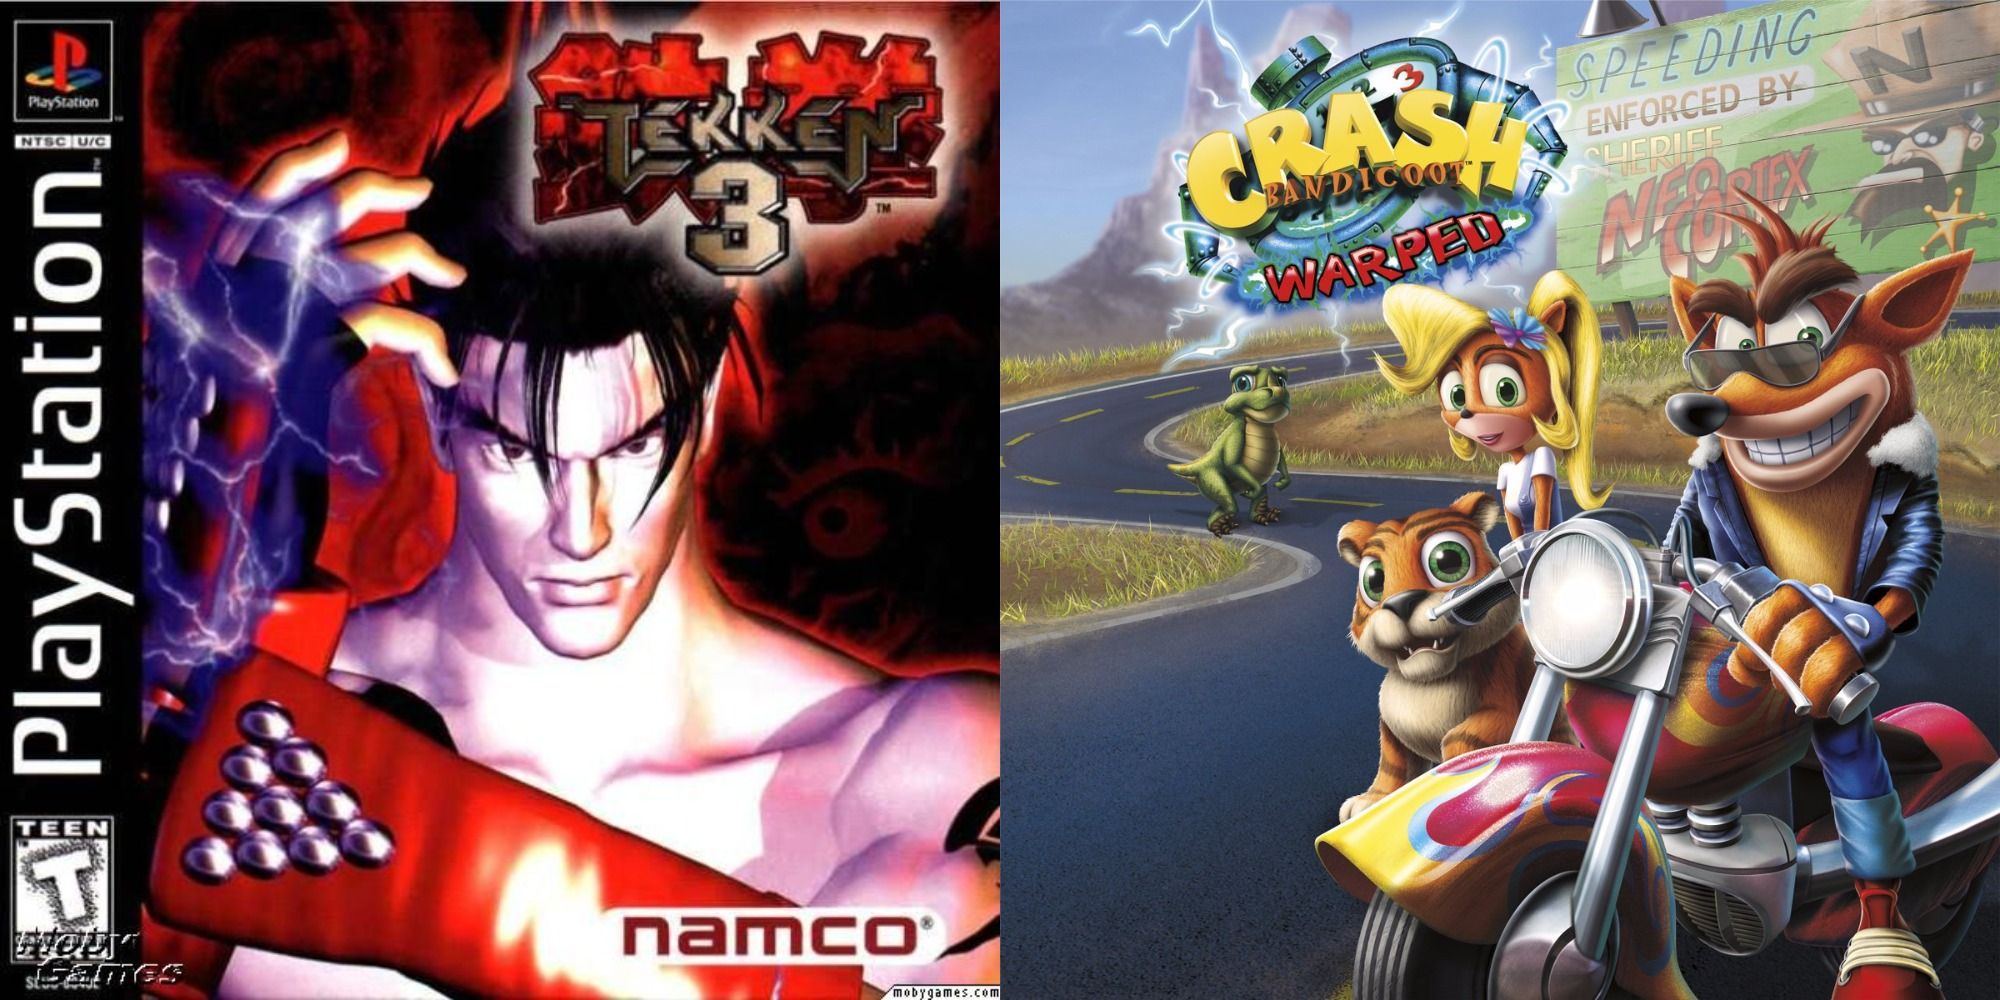 Two side by side images of box art from Tekken 3 and Crash Bandicoot Warped for PS1